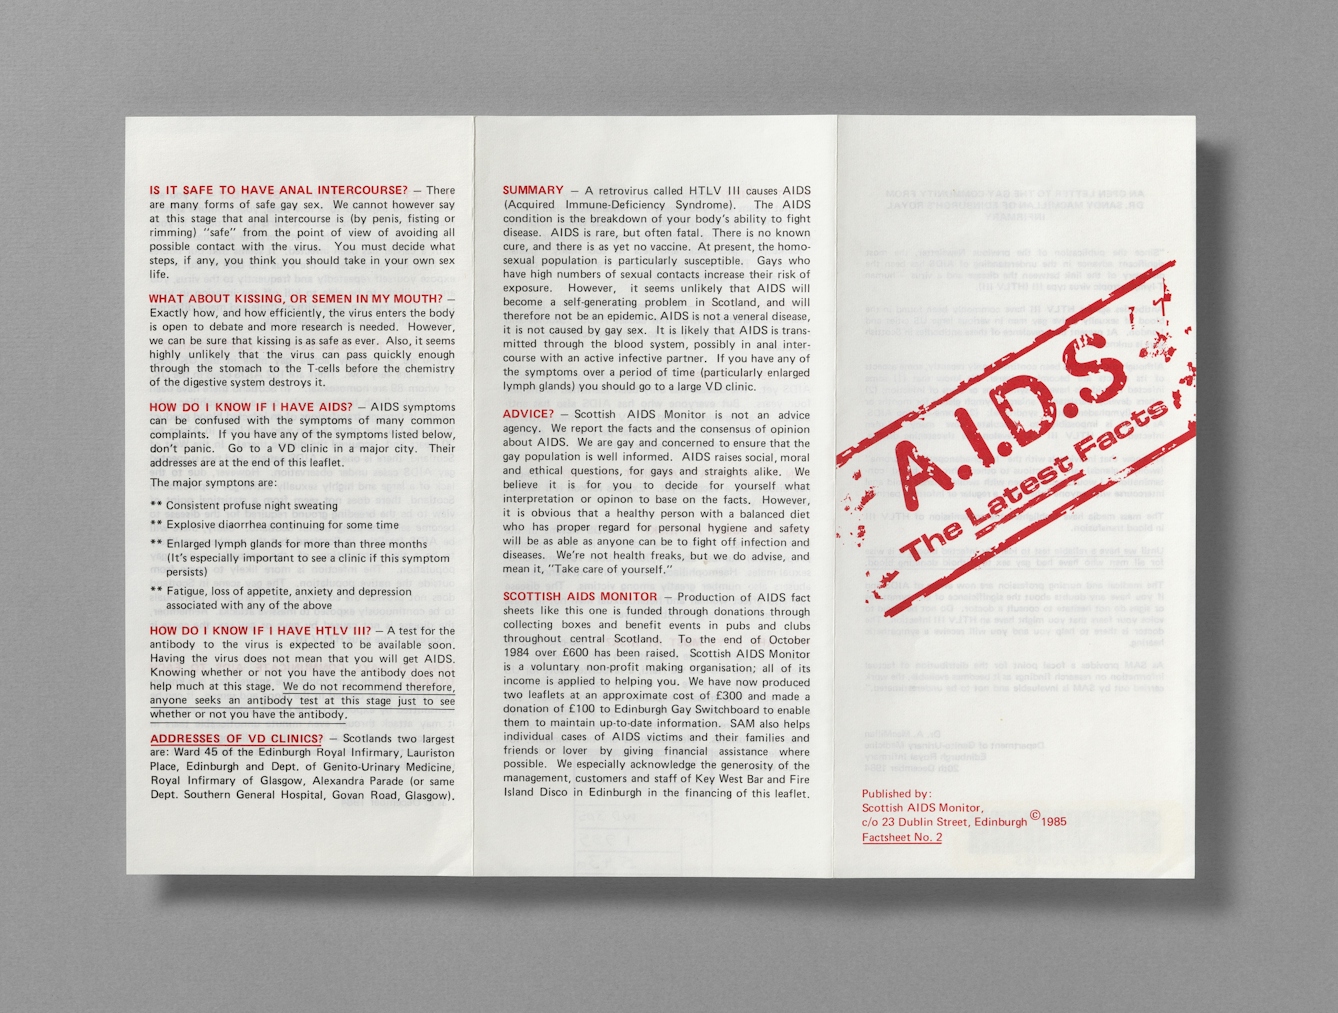 Colour photograph of one folded sheet pamphlet with the red title A.I.D.S The Latest Facts. There is a lot of black text and red subheads including "is it safe to have anal intercourse?" and "How do I know if I have AIDS?" 